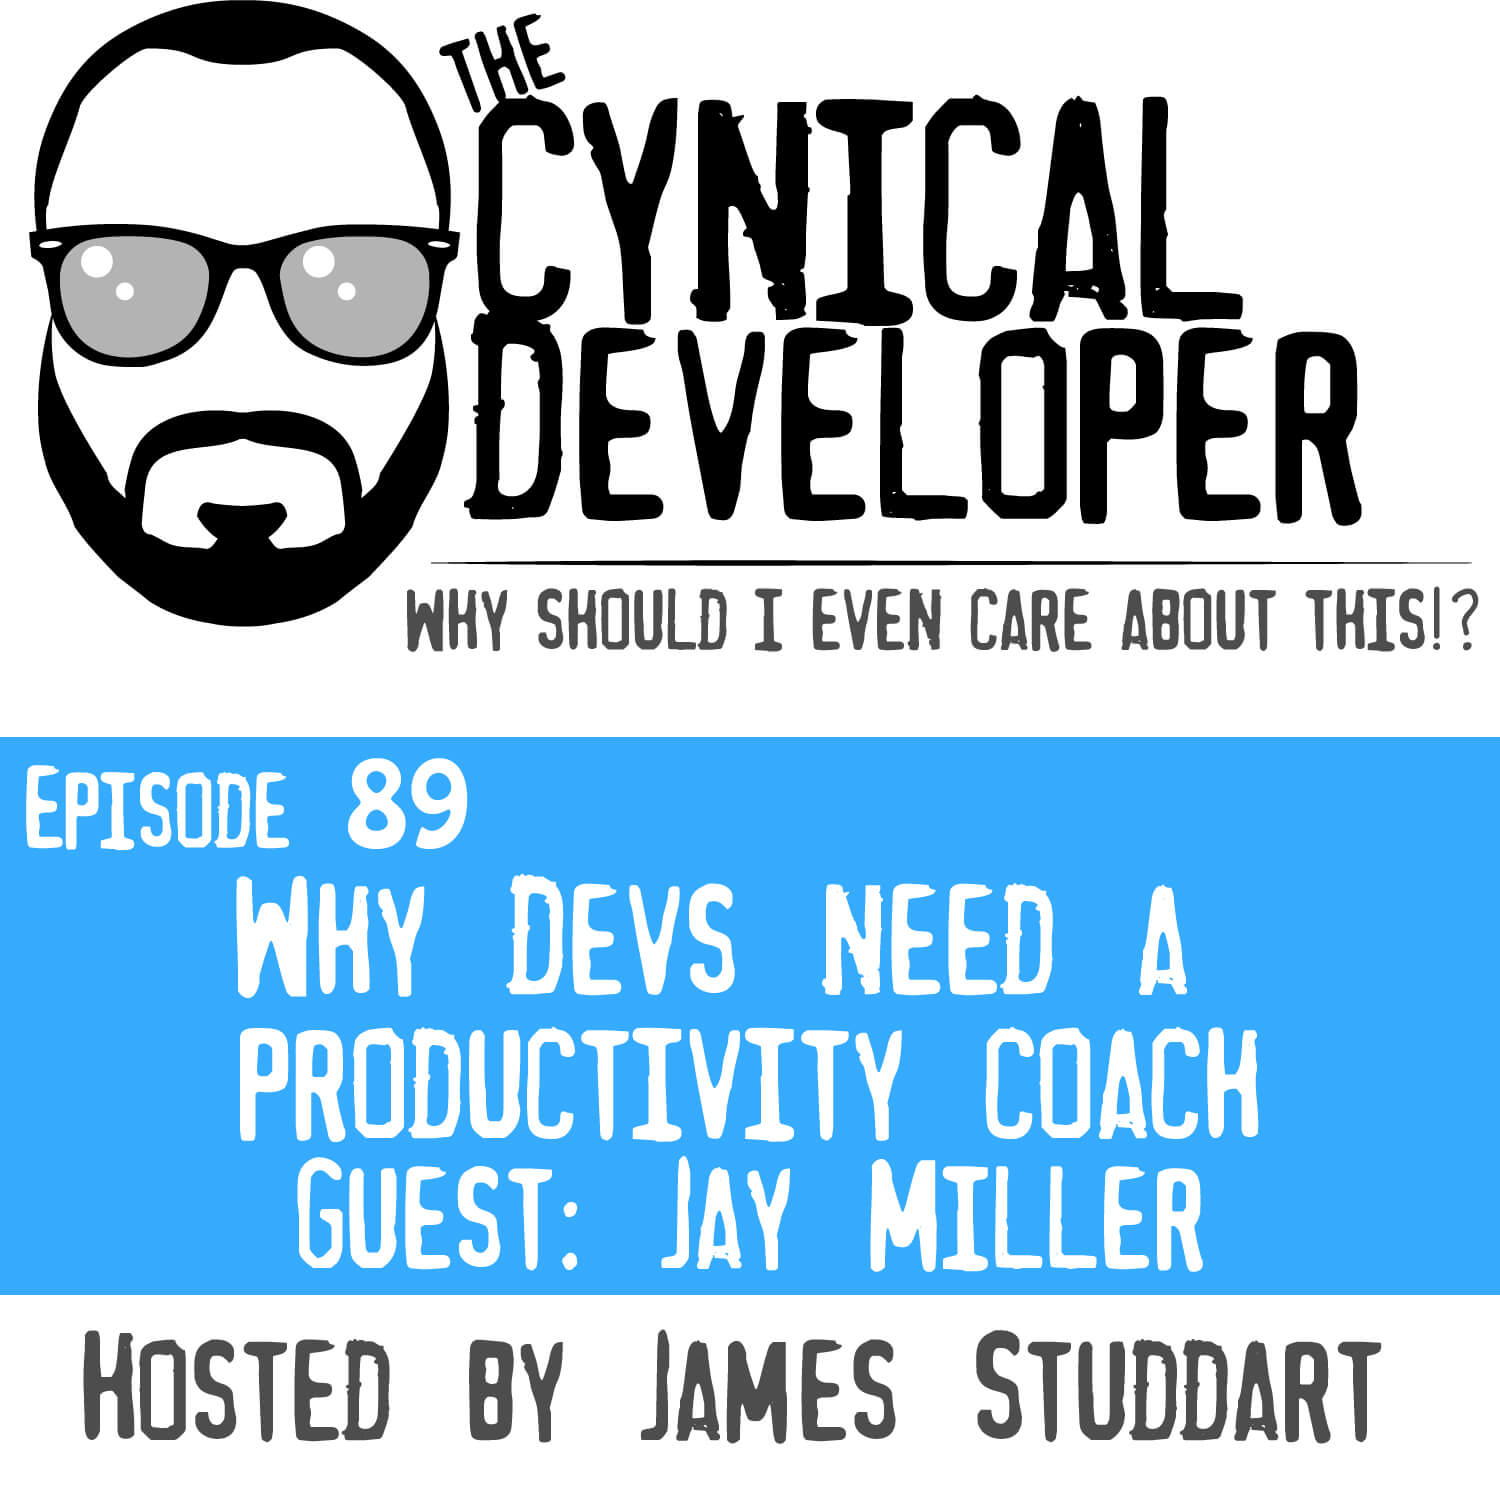 Episode 89 - Why Devs need a Productivity Coach